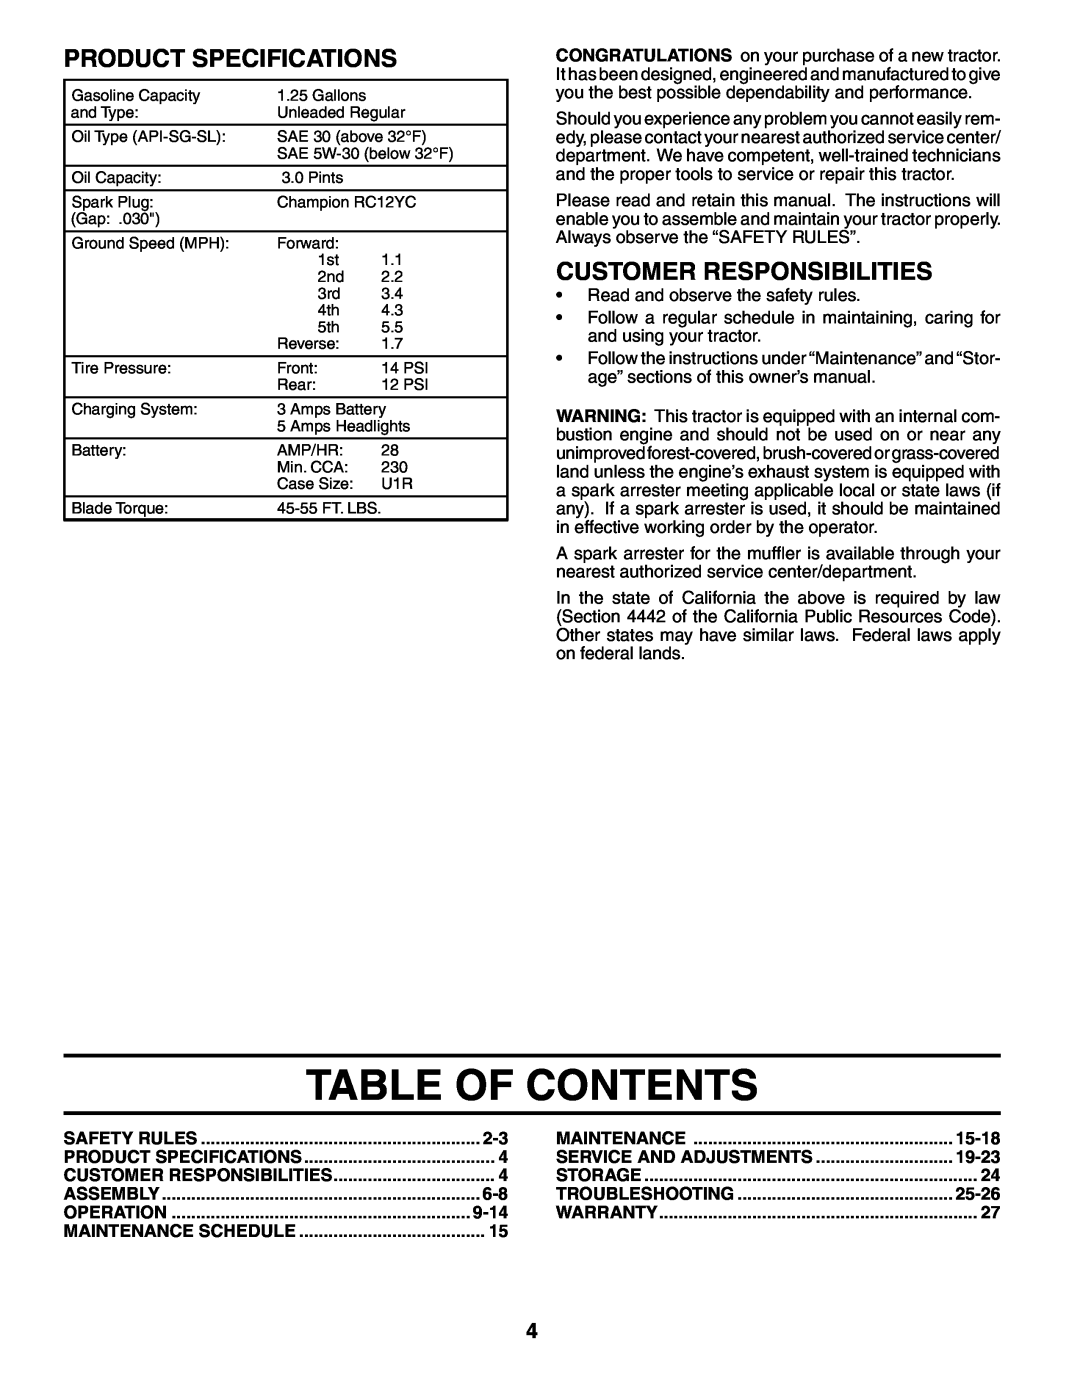 Murray MB12538LT manual Table Of Contents, Product Specifications, Customer Responsibilities, 9-14, 15-18, 19-23, 25-26 